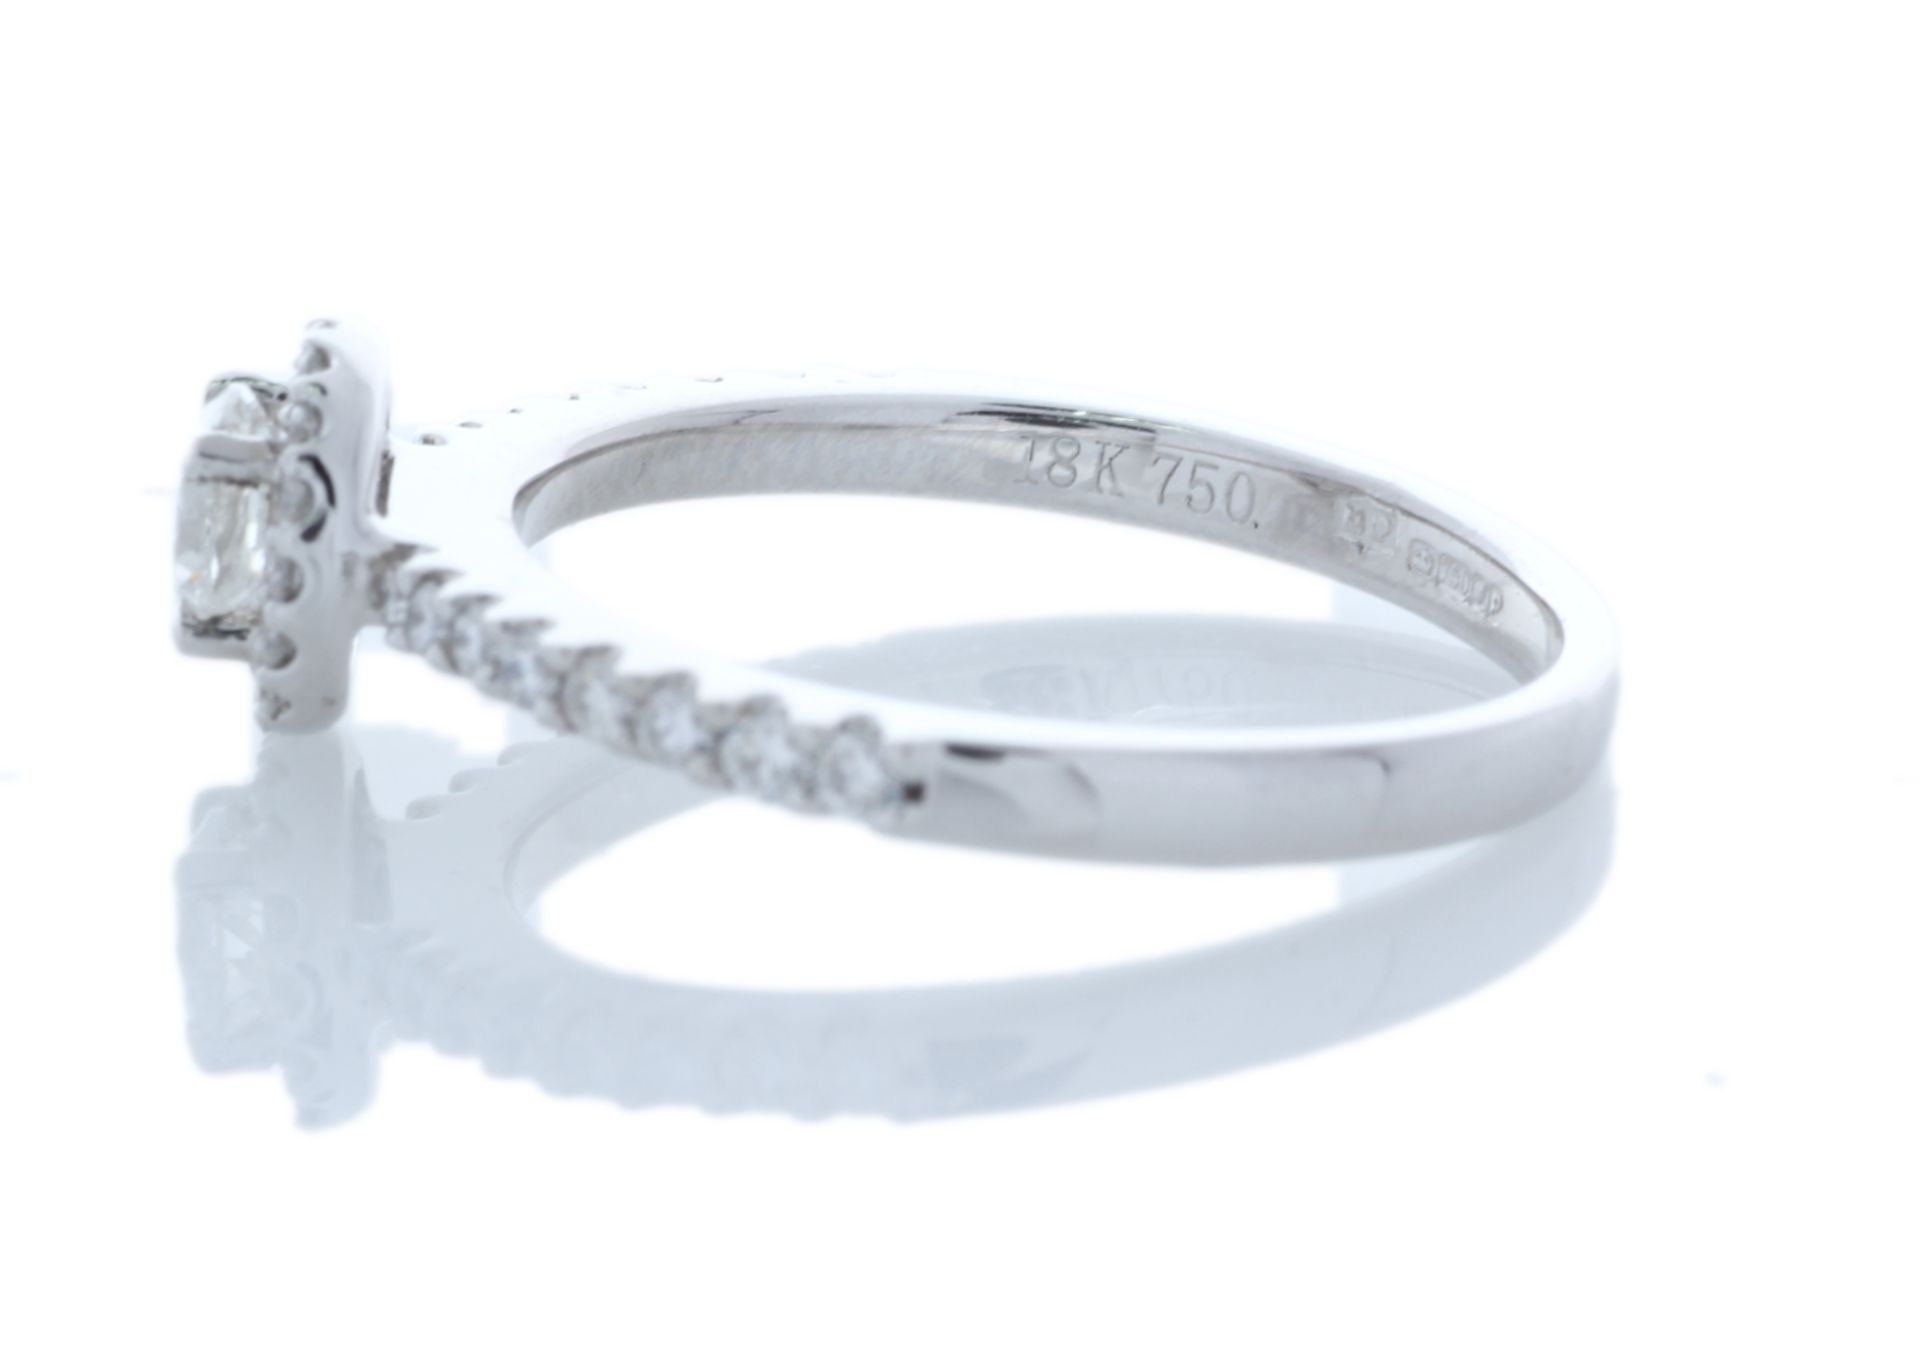 18ct White Gold Single Stone With Halo Setting Ring (0.31) 0.63 Carats - Valued By GIE £6,430.00 - - Image 2 of 5